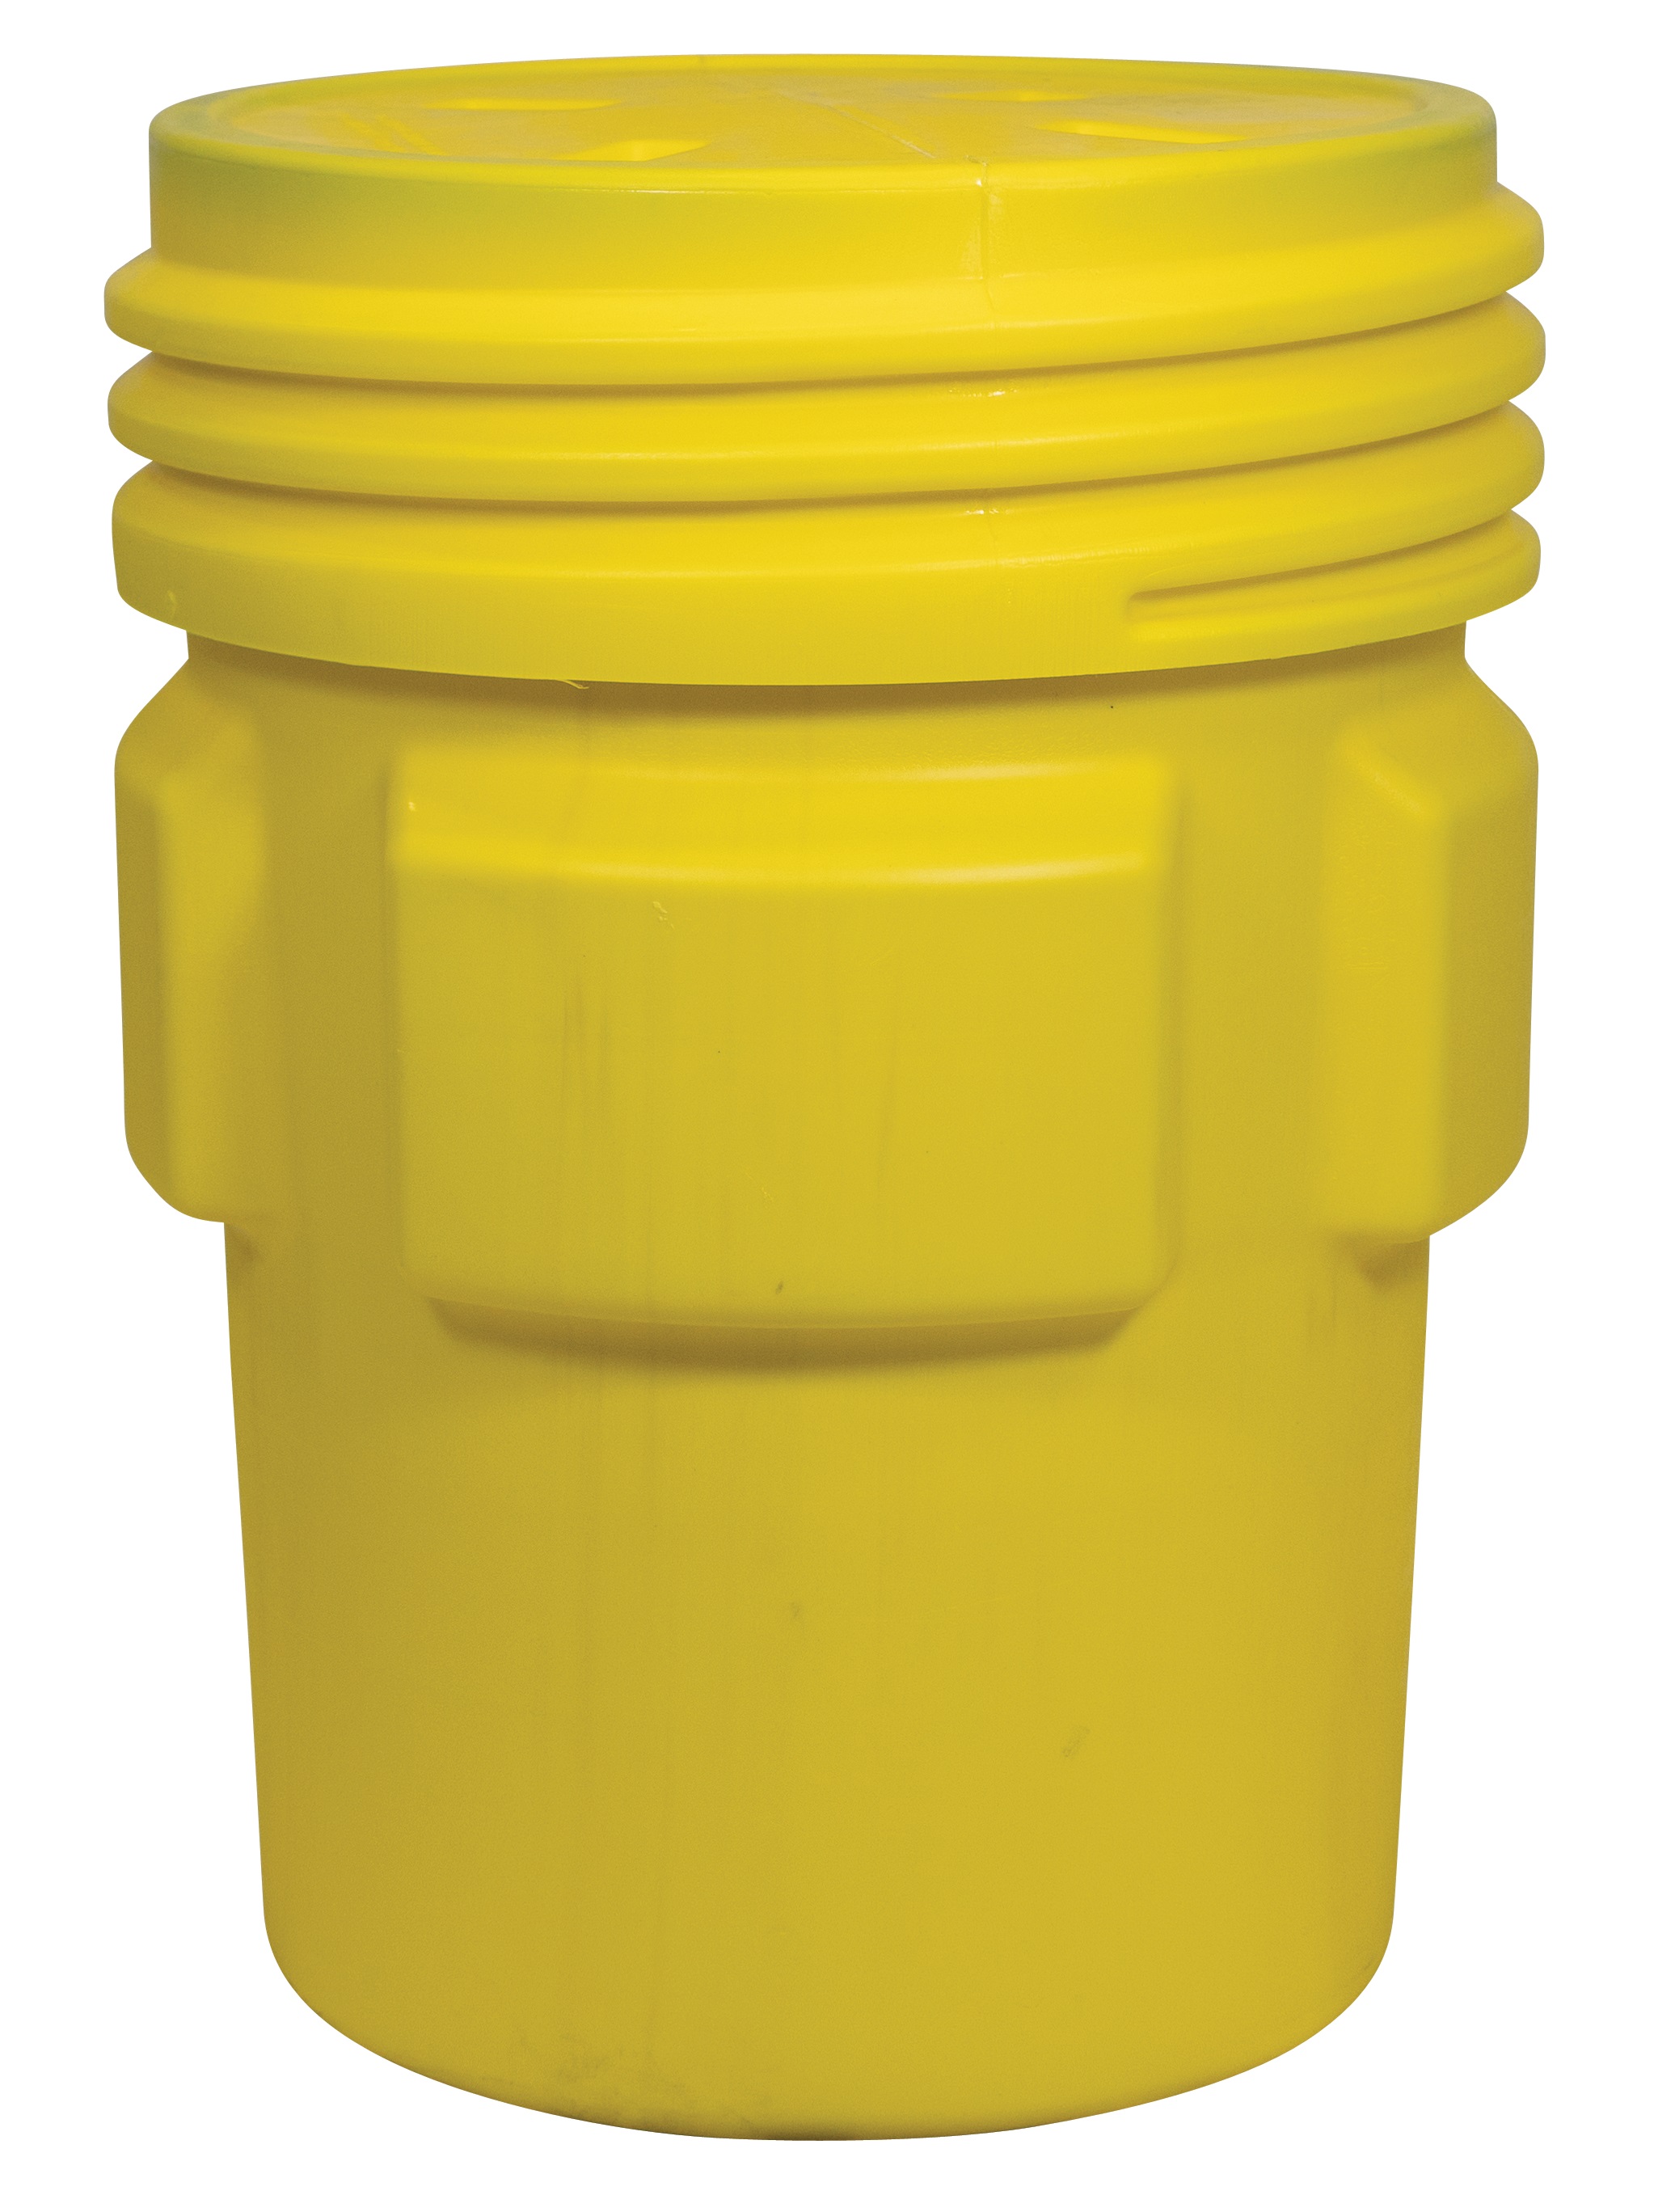 Eagle 1690 95 GAL OVERPACK-YELLOW - Spill Containment